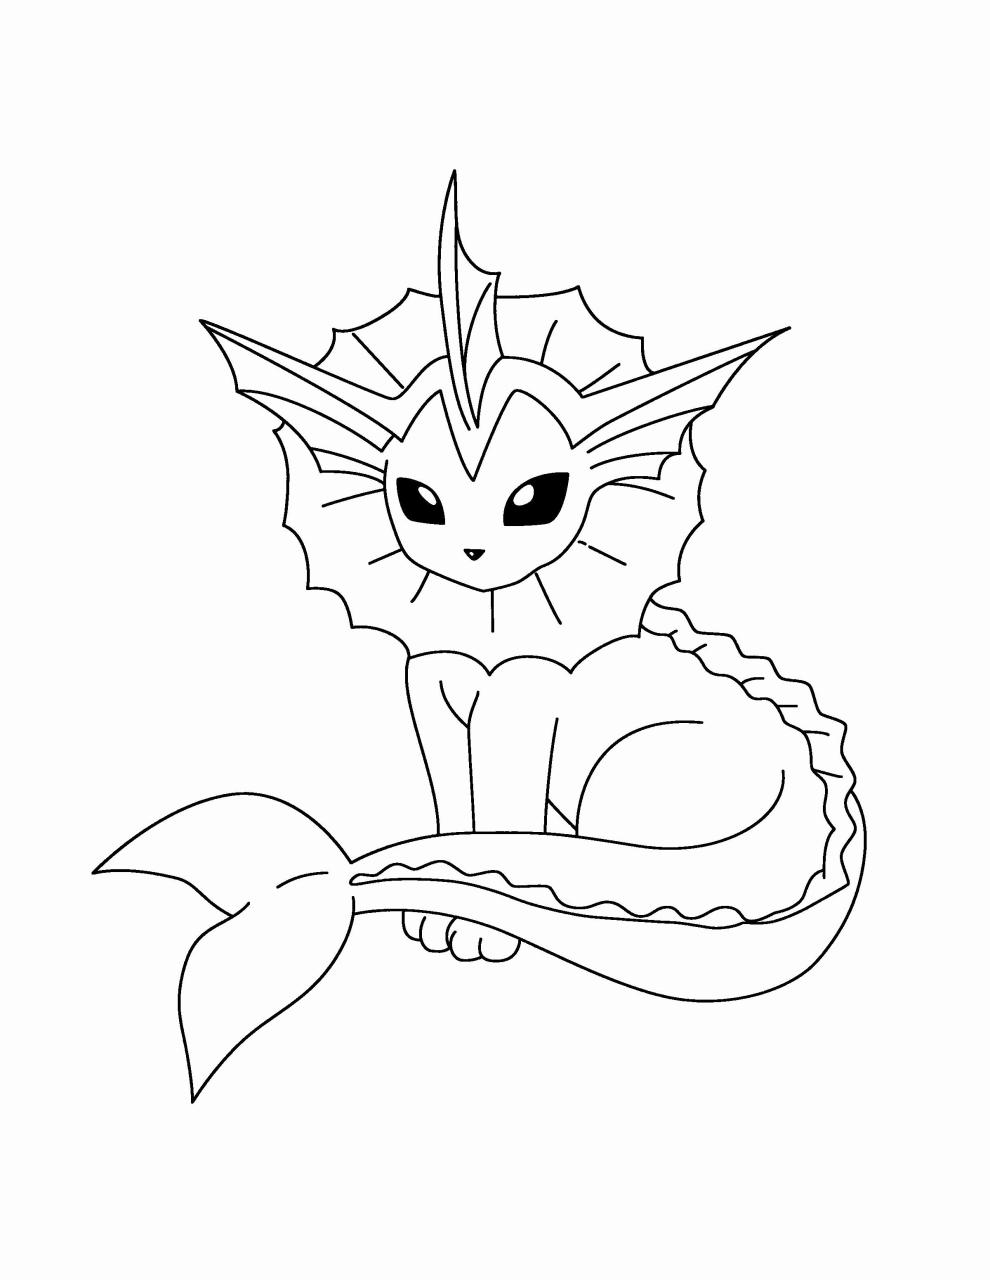 Eevee Evolutions Coloring Page Beautiful Chibi Pokemon Coloring Pages